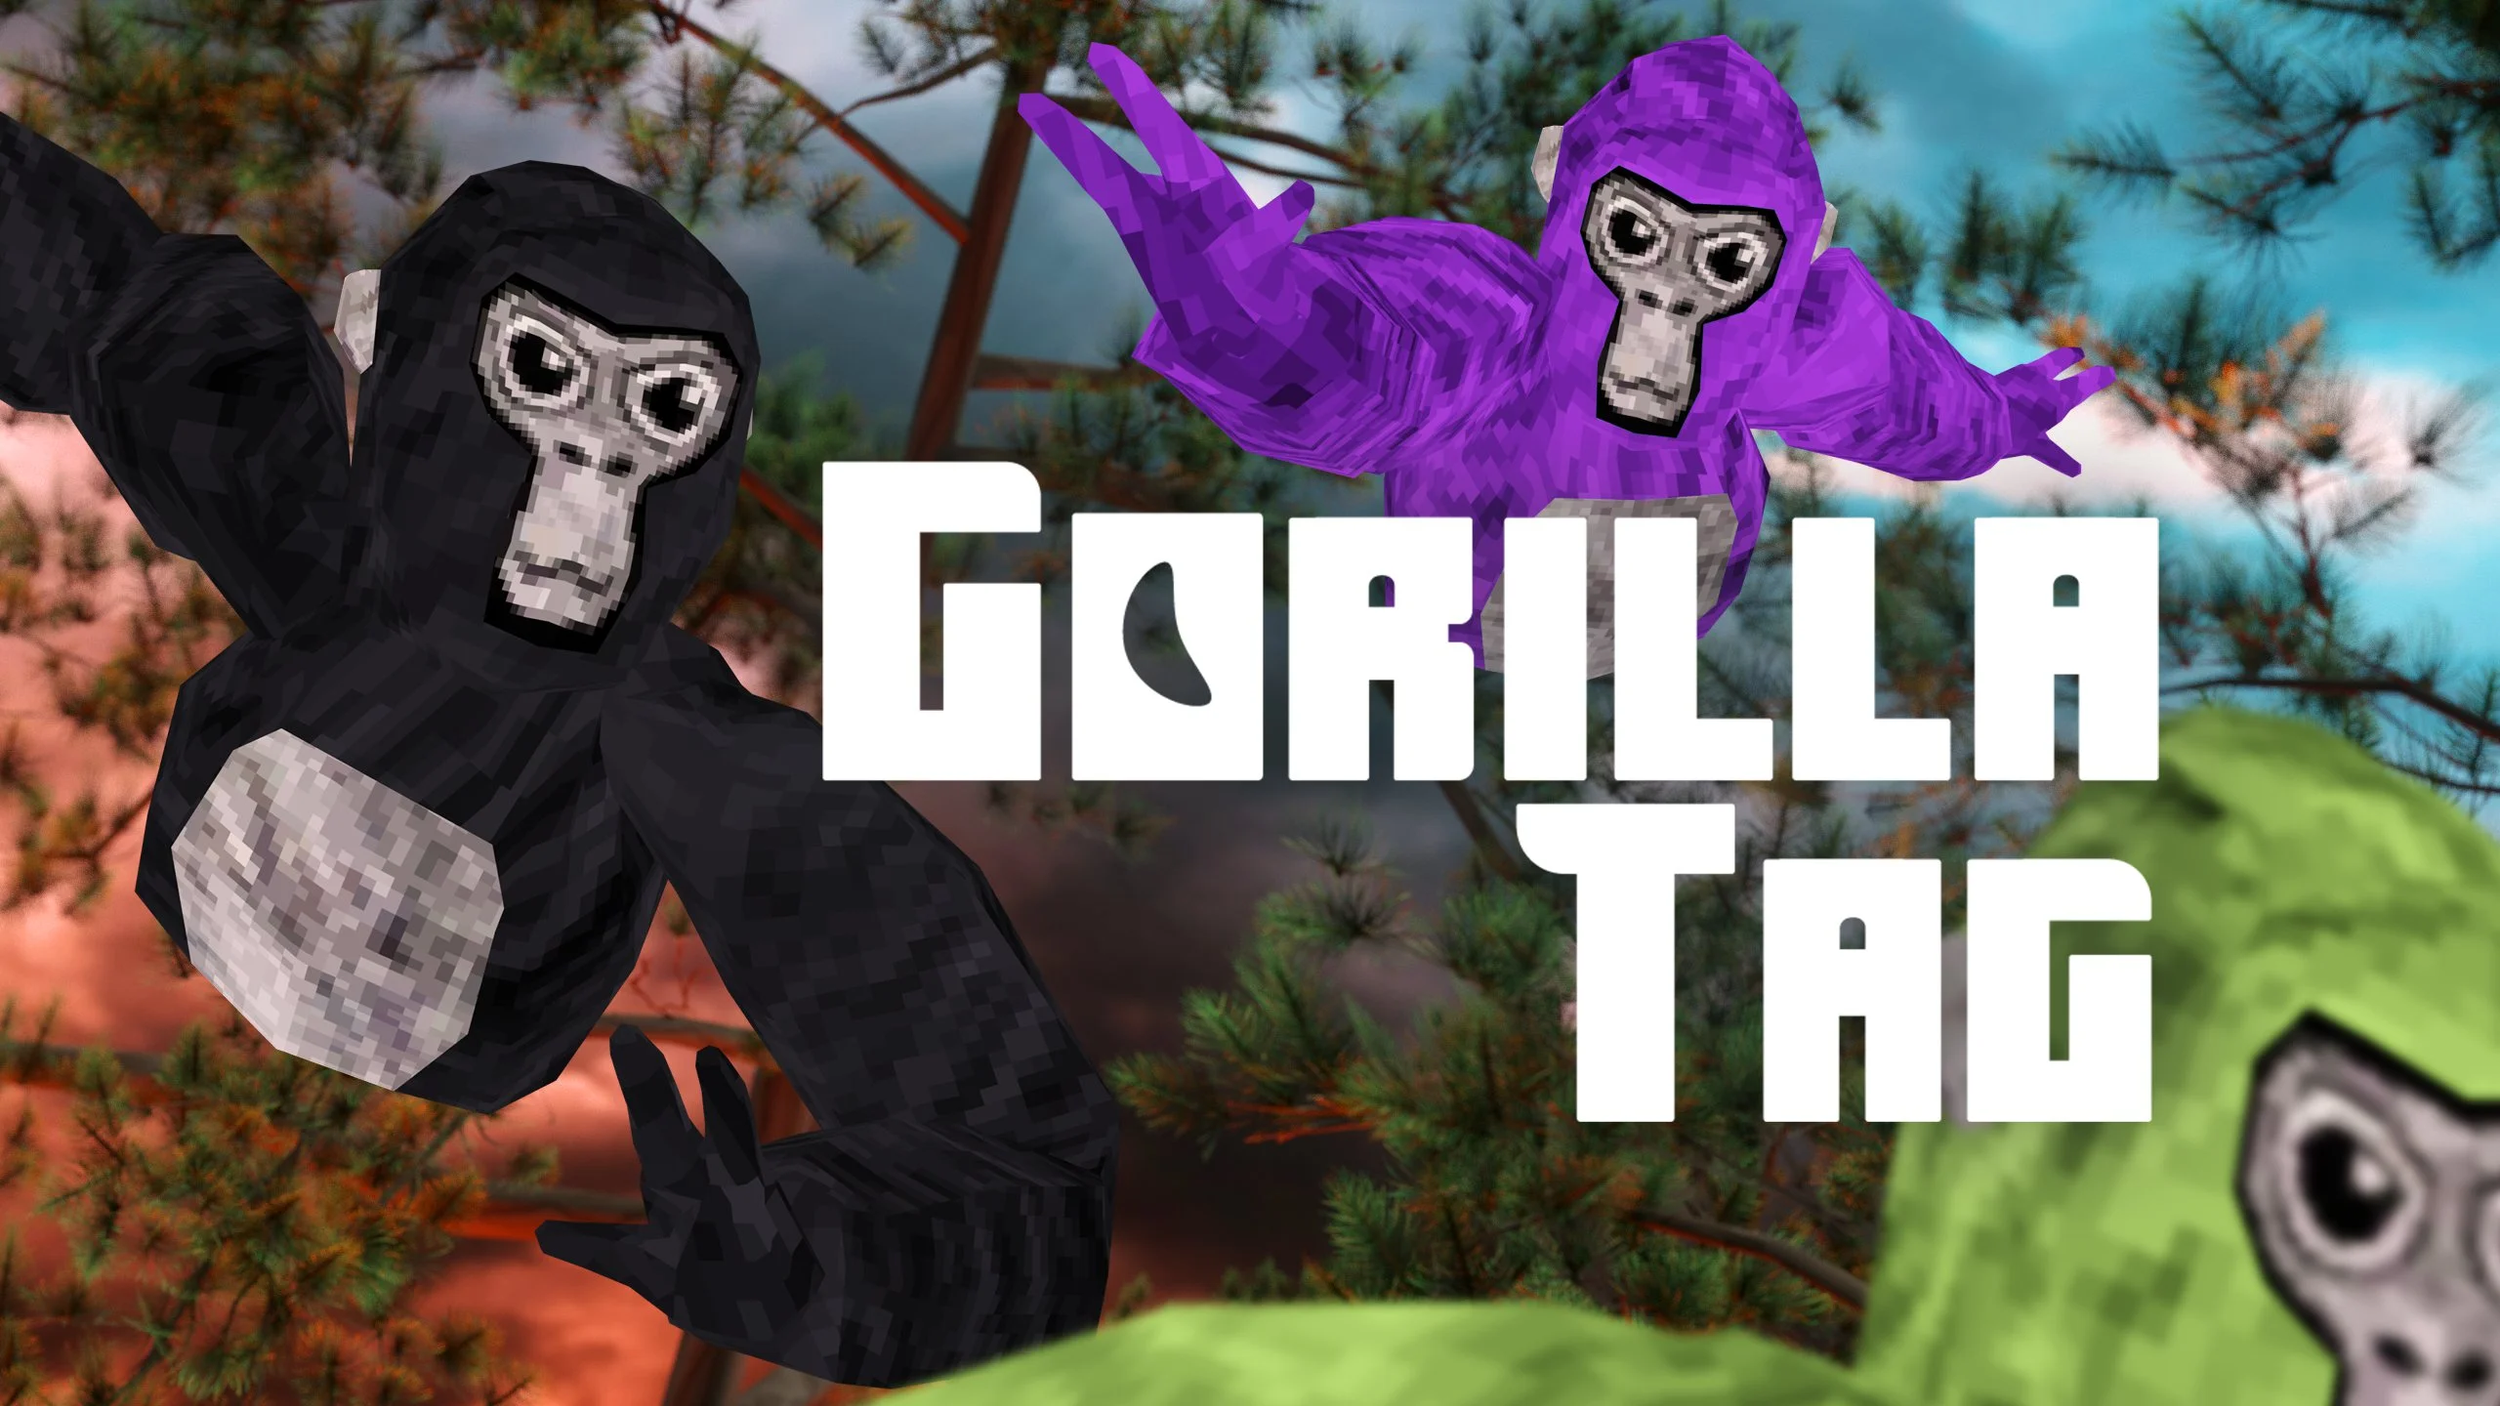 Easily Install Gorilla Tag Mods Step by Step — Reality Remake: VR Is the  Future